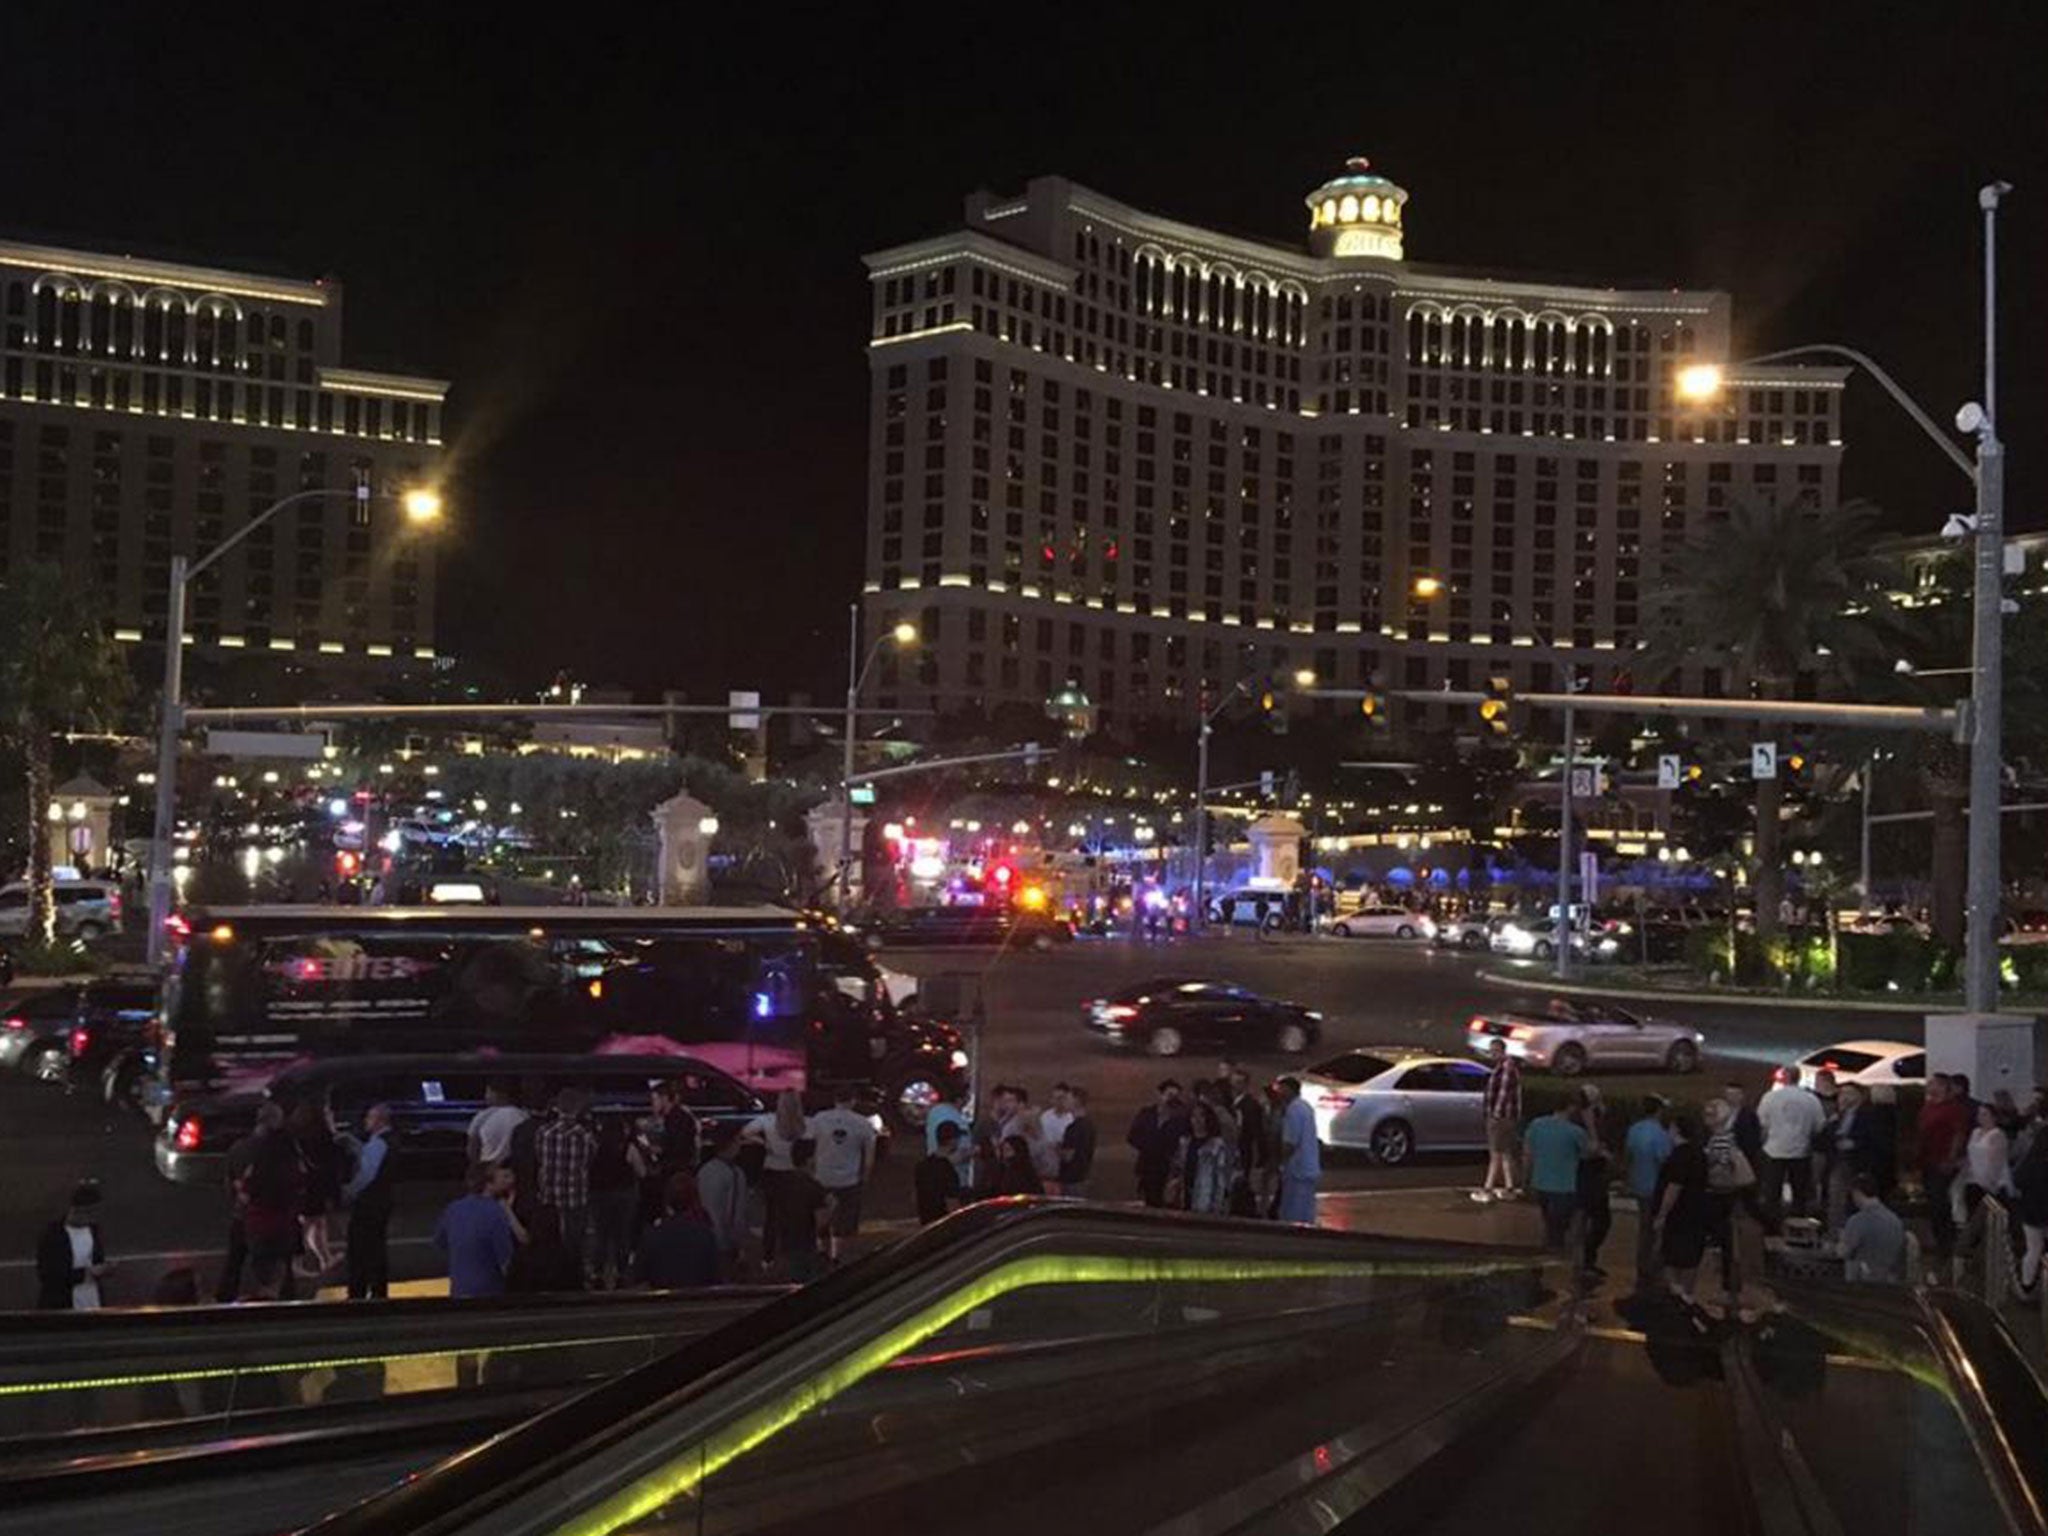 Police surrounding the Bellagio hotel after a reported shooting in the early hours of 25 March